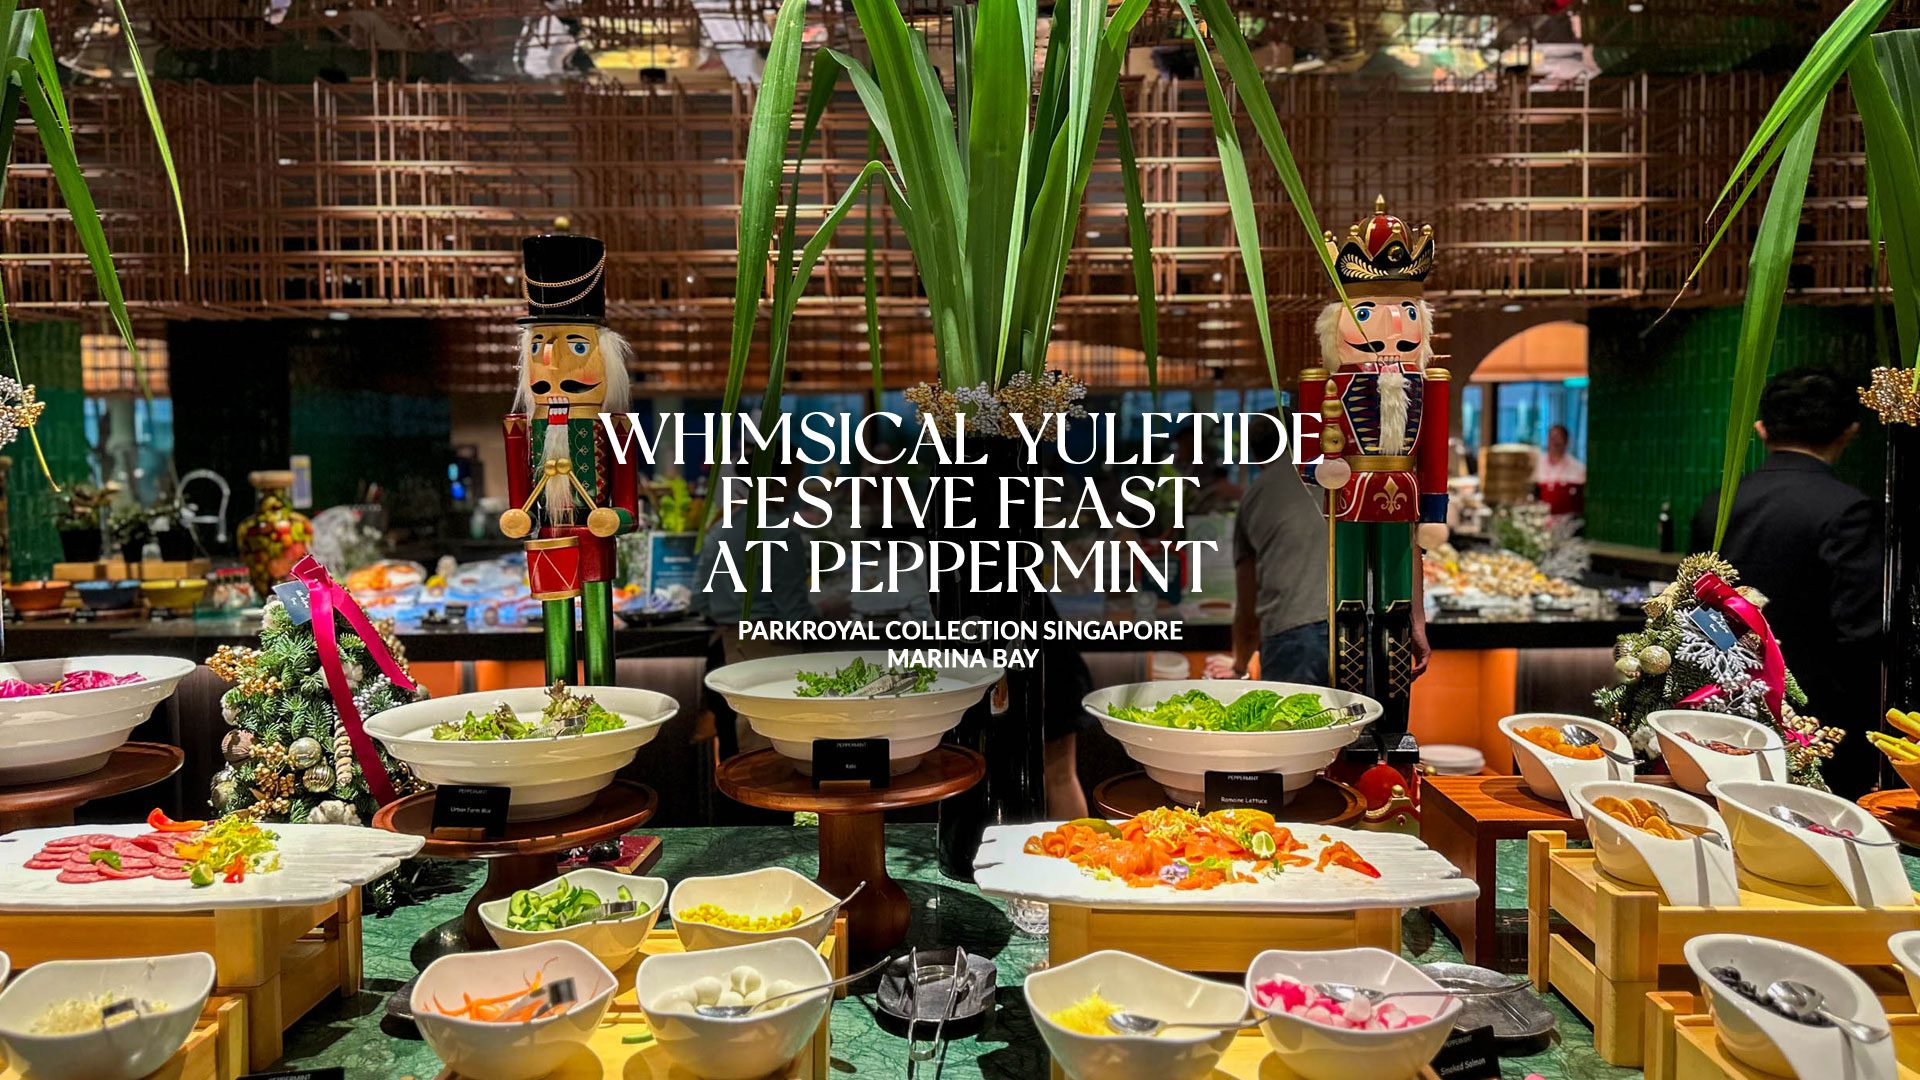 Whimsical-Yuletide-Festive-Feast-at-Peppermint-PARKROYAL-Marina-Bay-Singapore-darrenbloggie_0685-featured